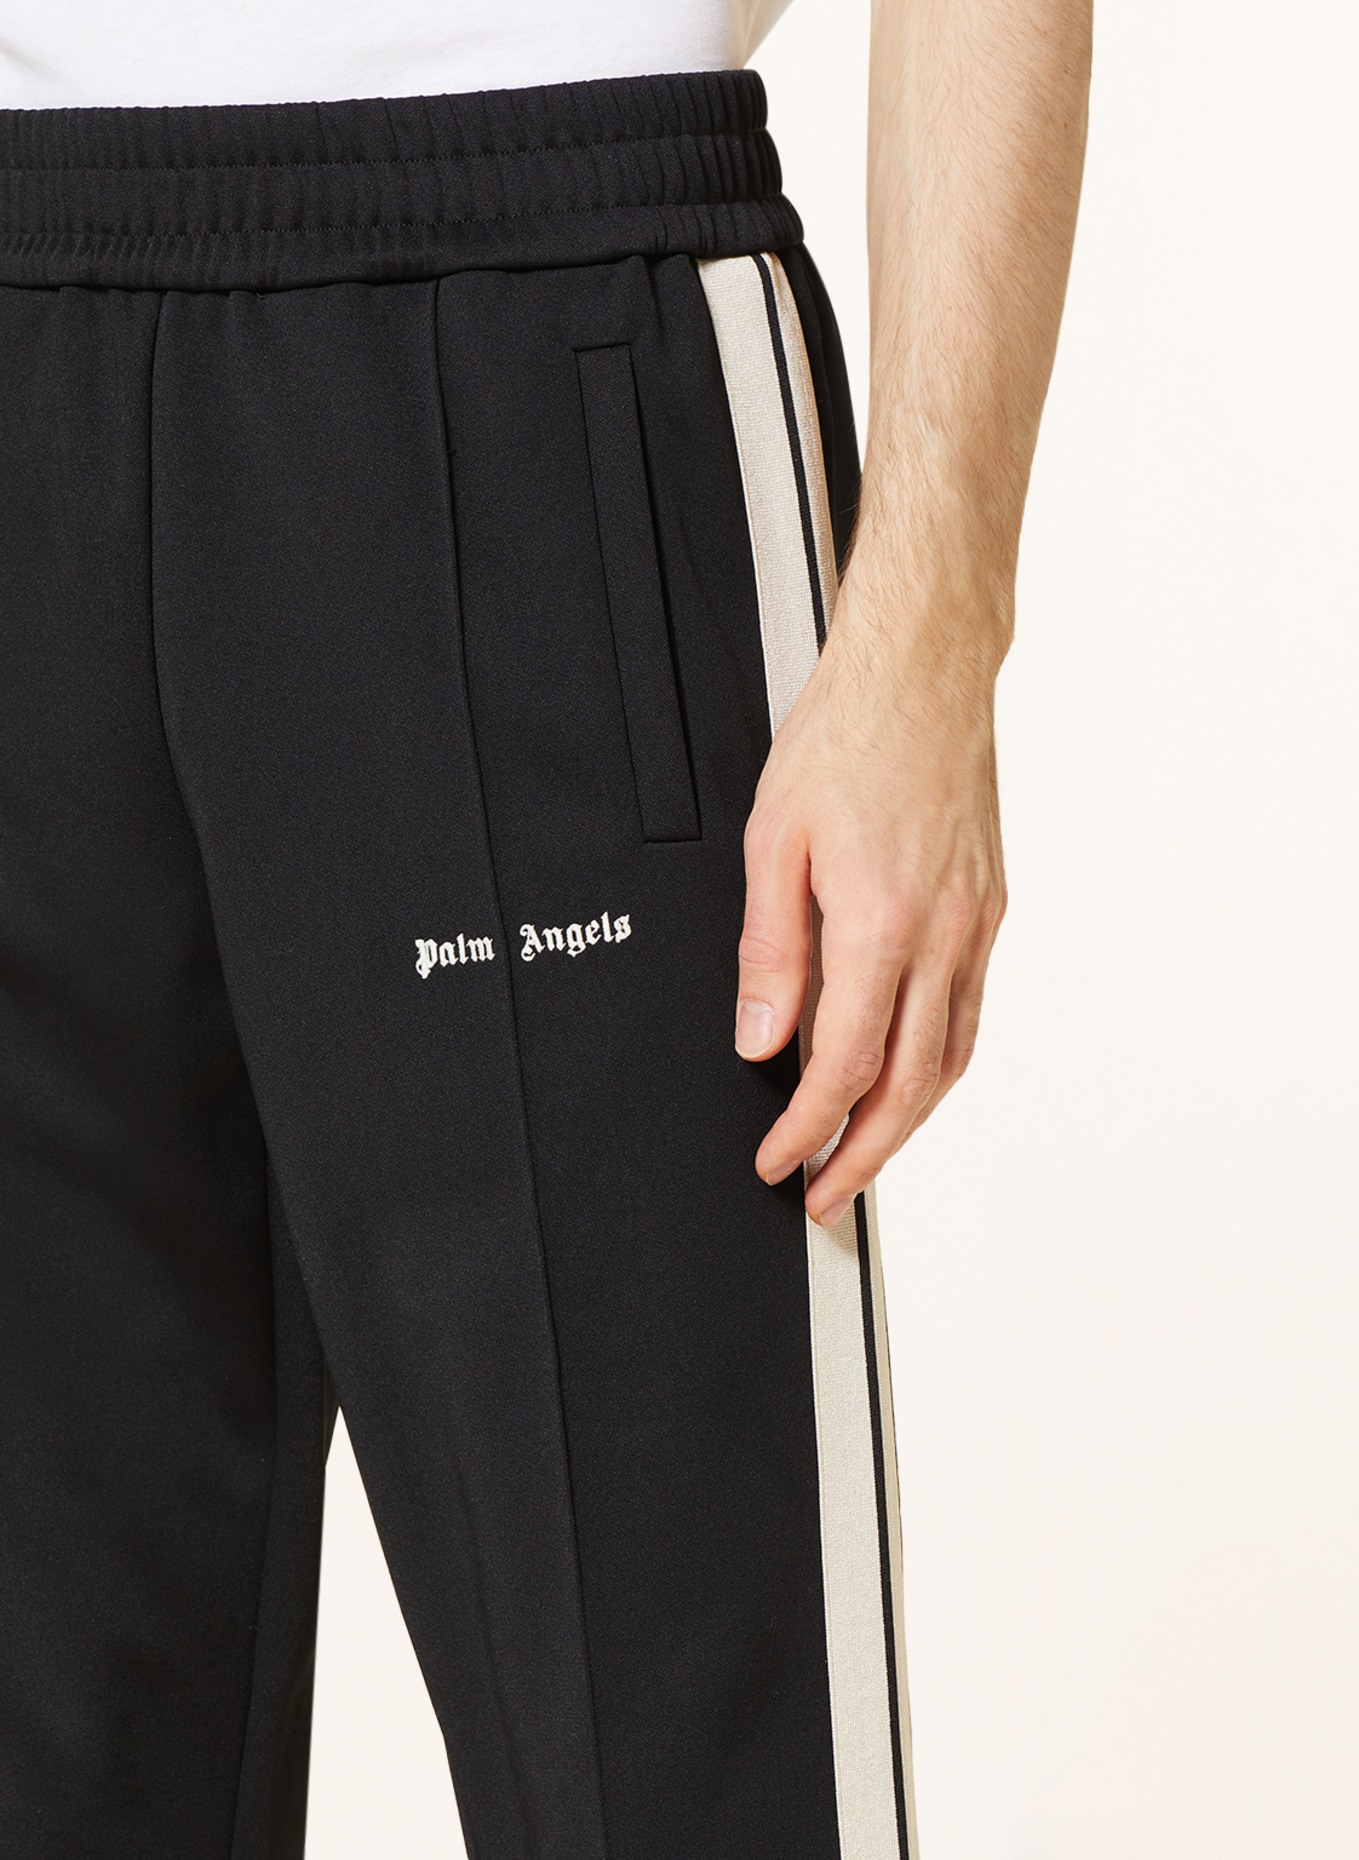 Palm Angels Track pants with tuxedo stripes in black/ cream